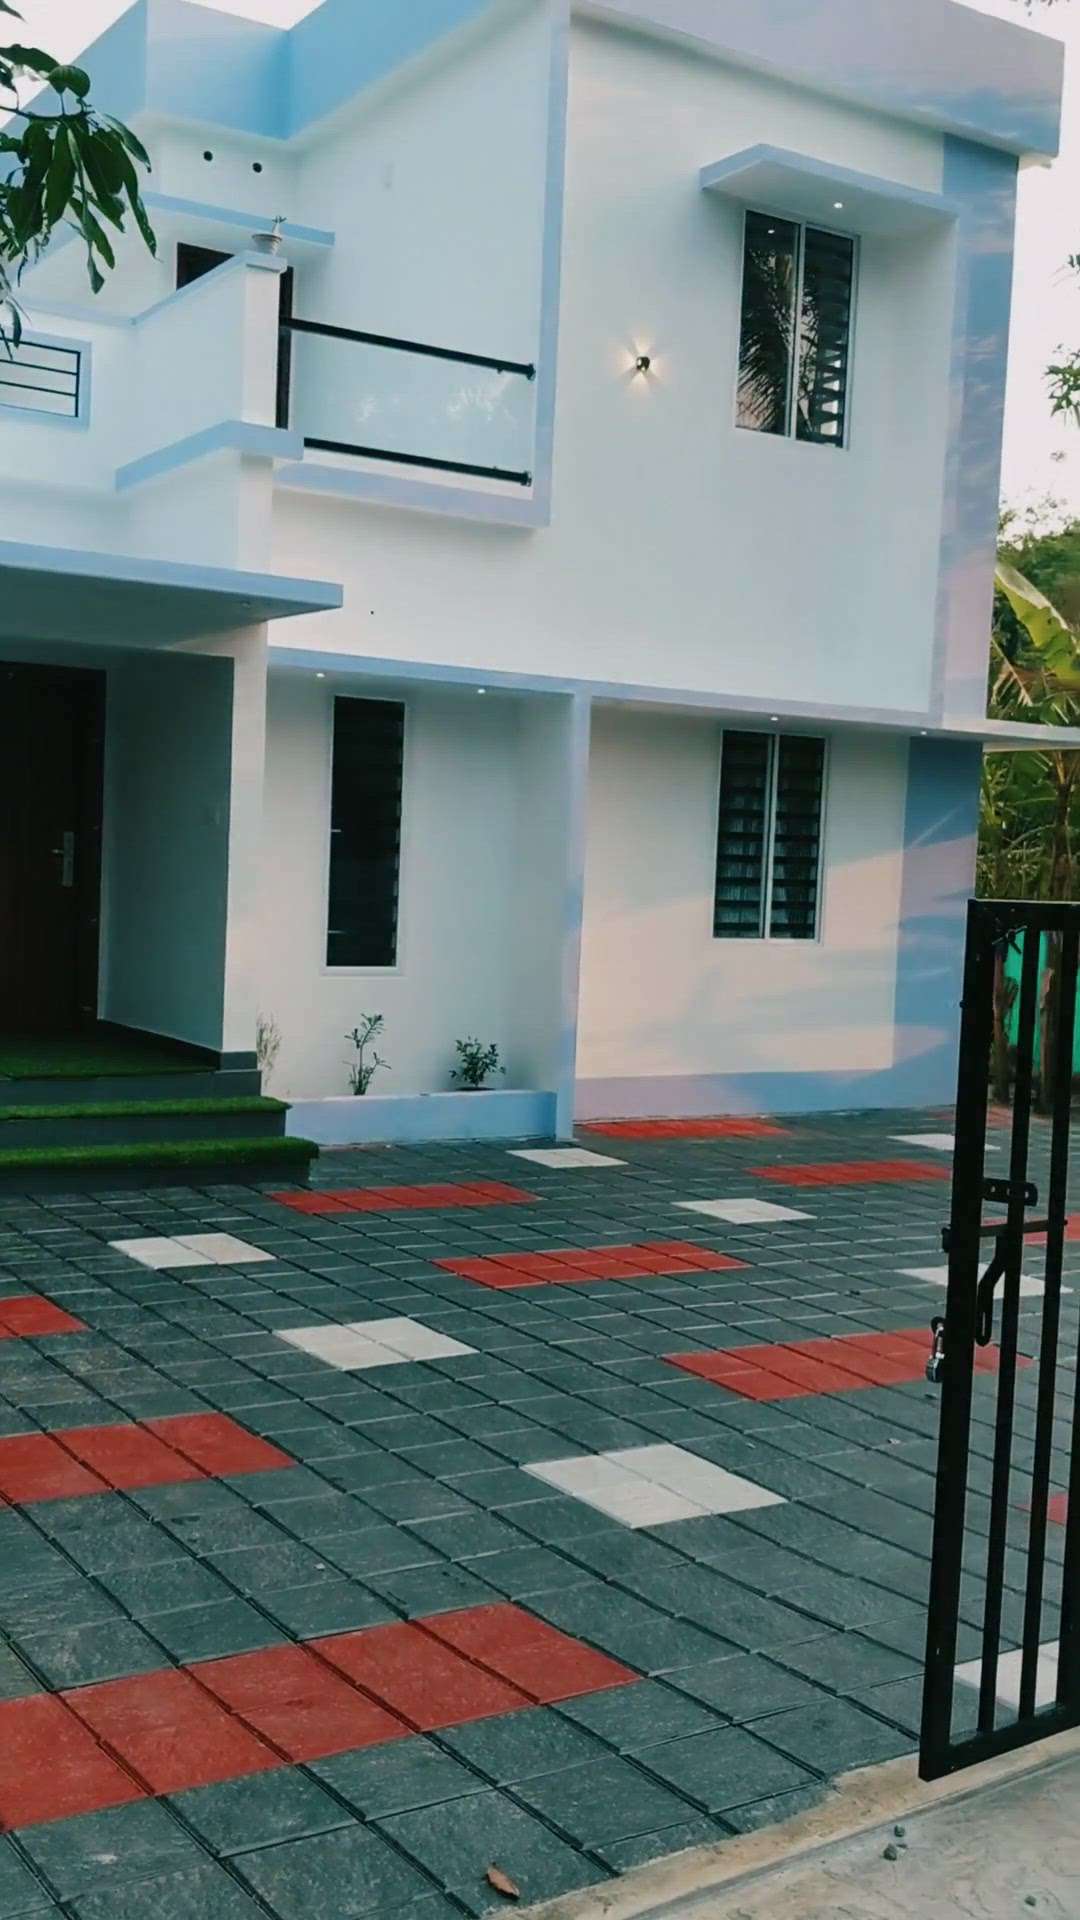 Our new 20 Lakhs 4BHK project completed at Alappuzha